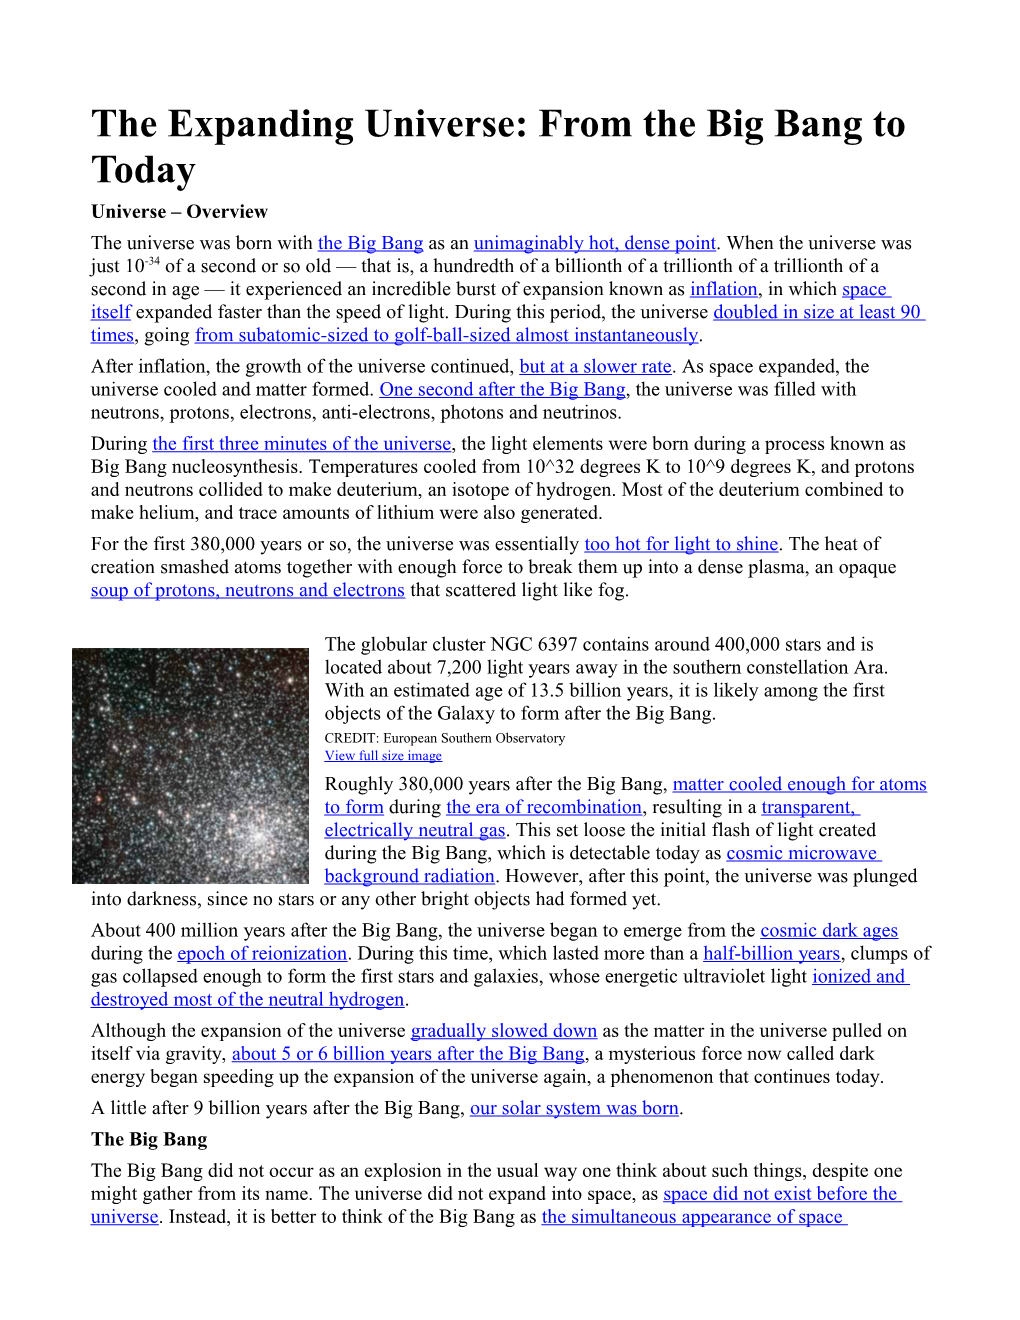 The Expanding Universe: from the Big Bang to Today